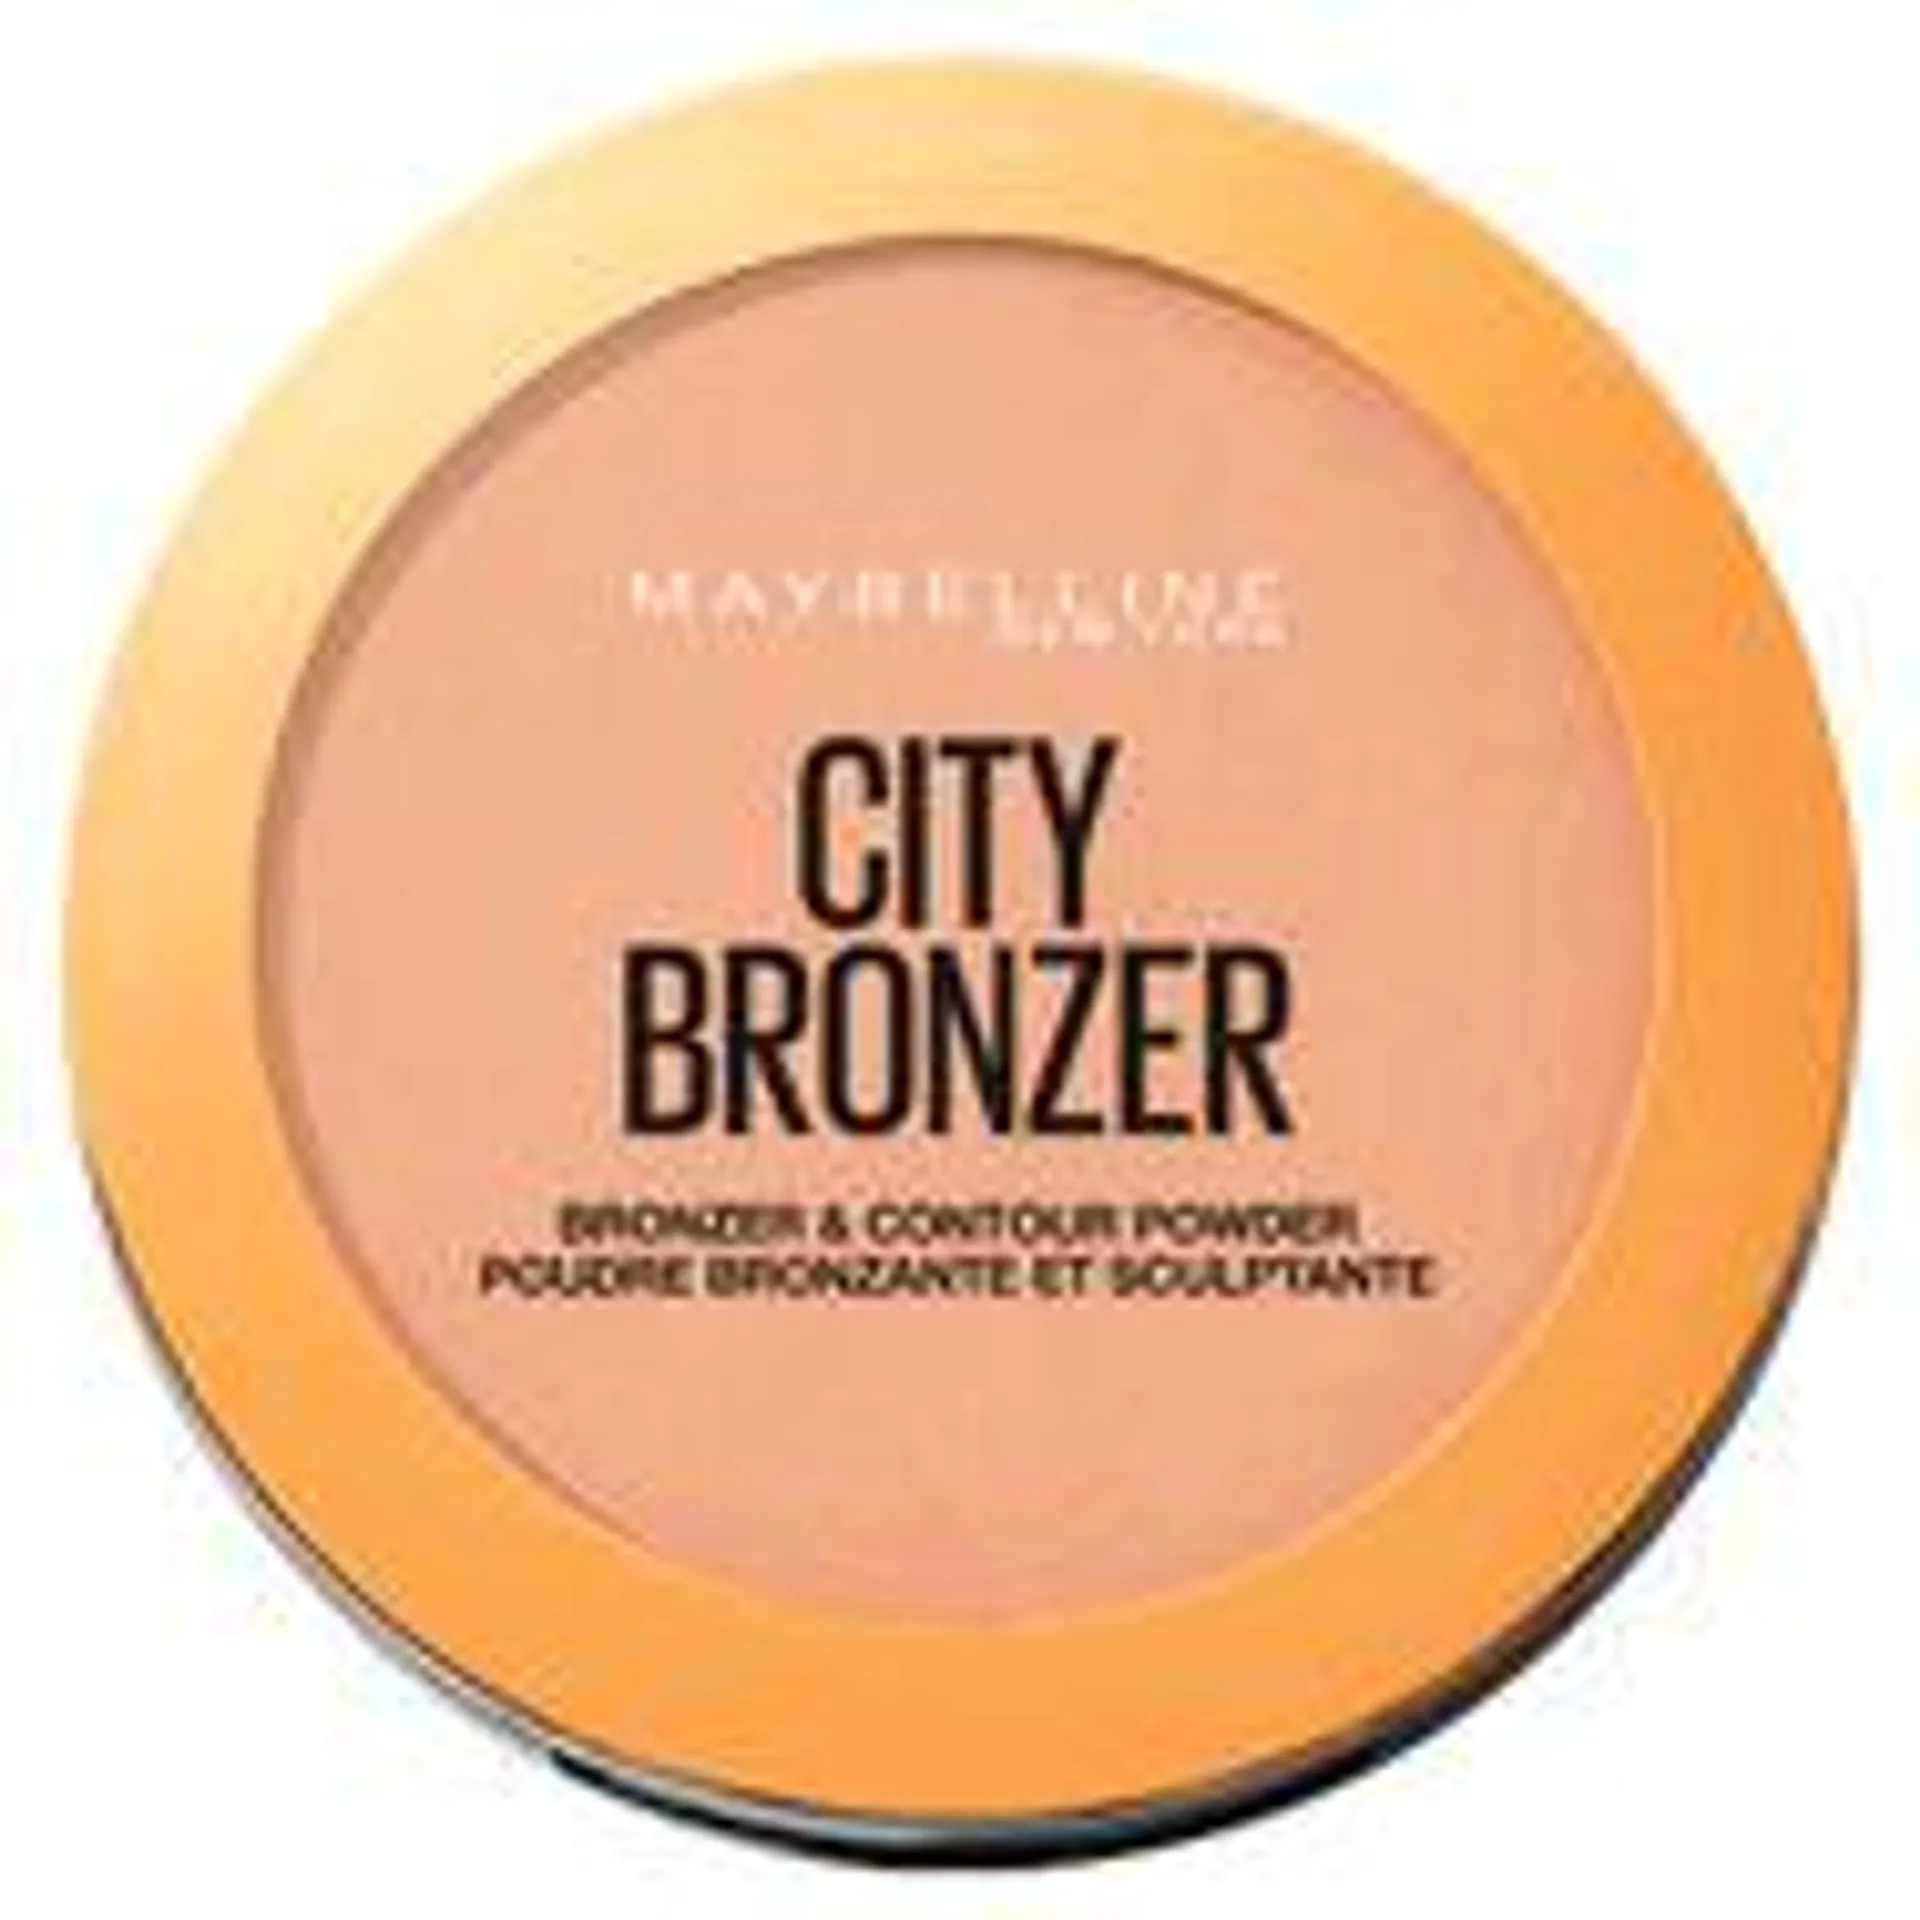 Maybelline City Bronze Flawless Shimmer Natural Pressed Bronzer 200 Medium Cool